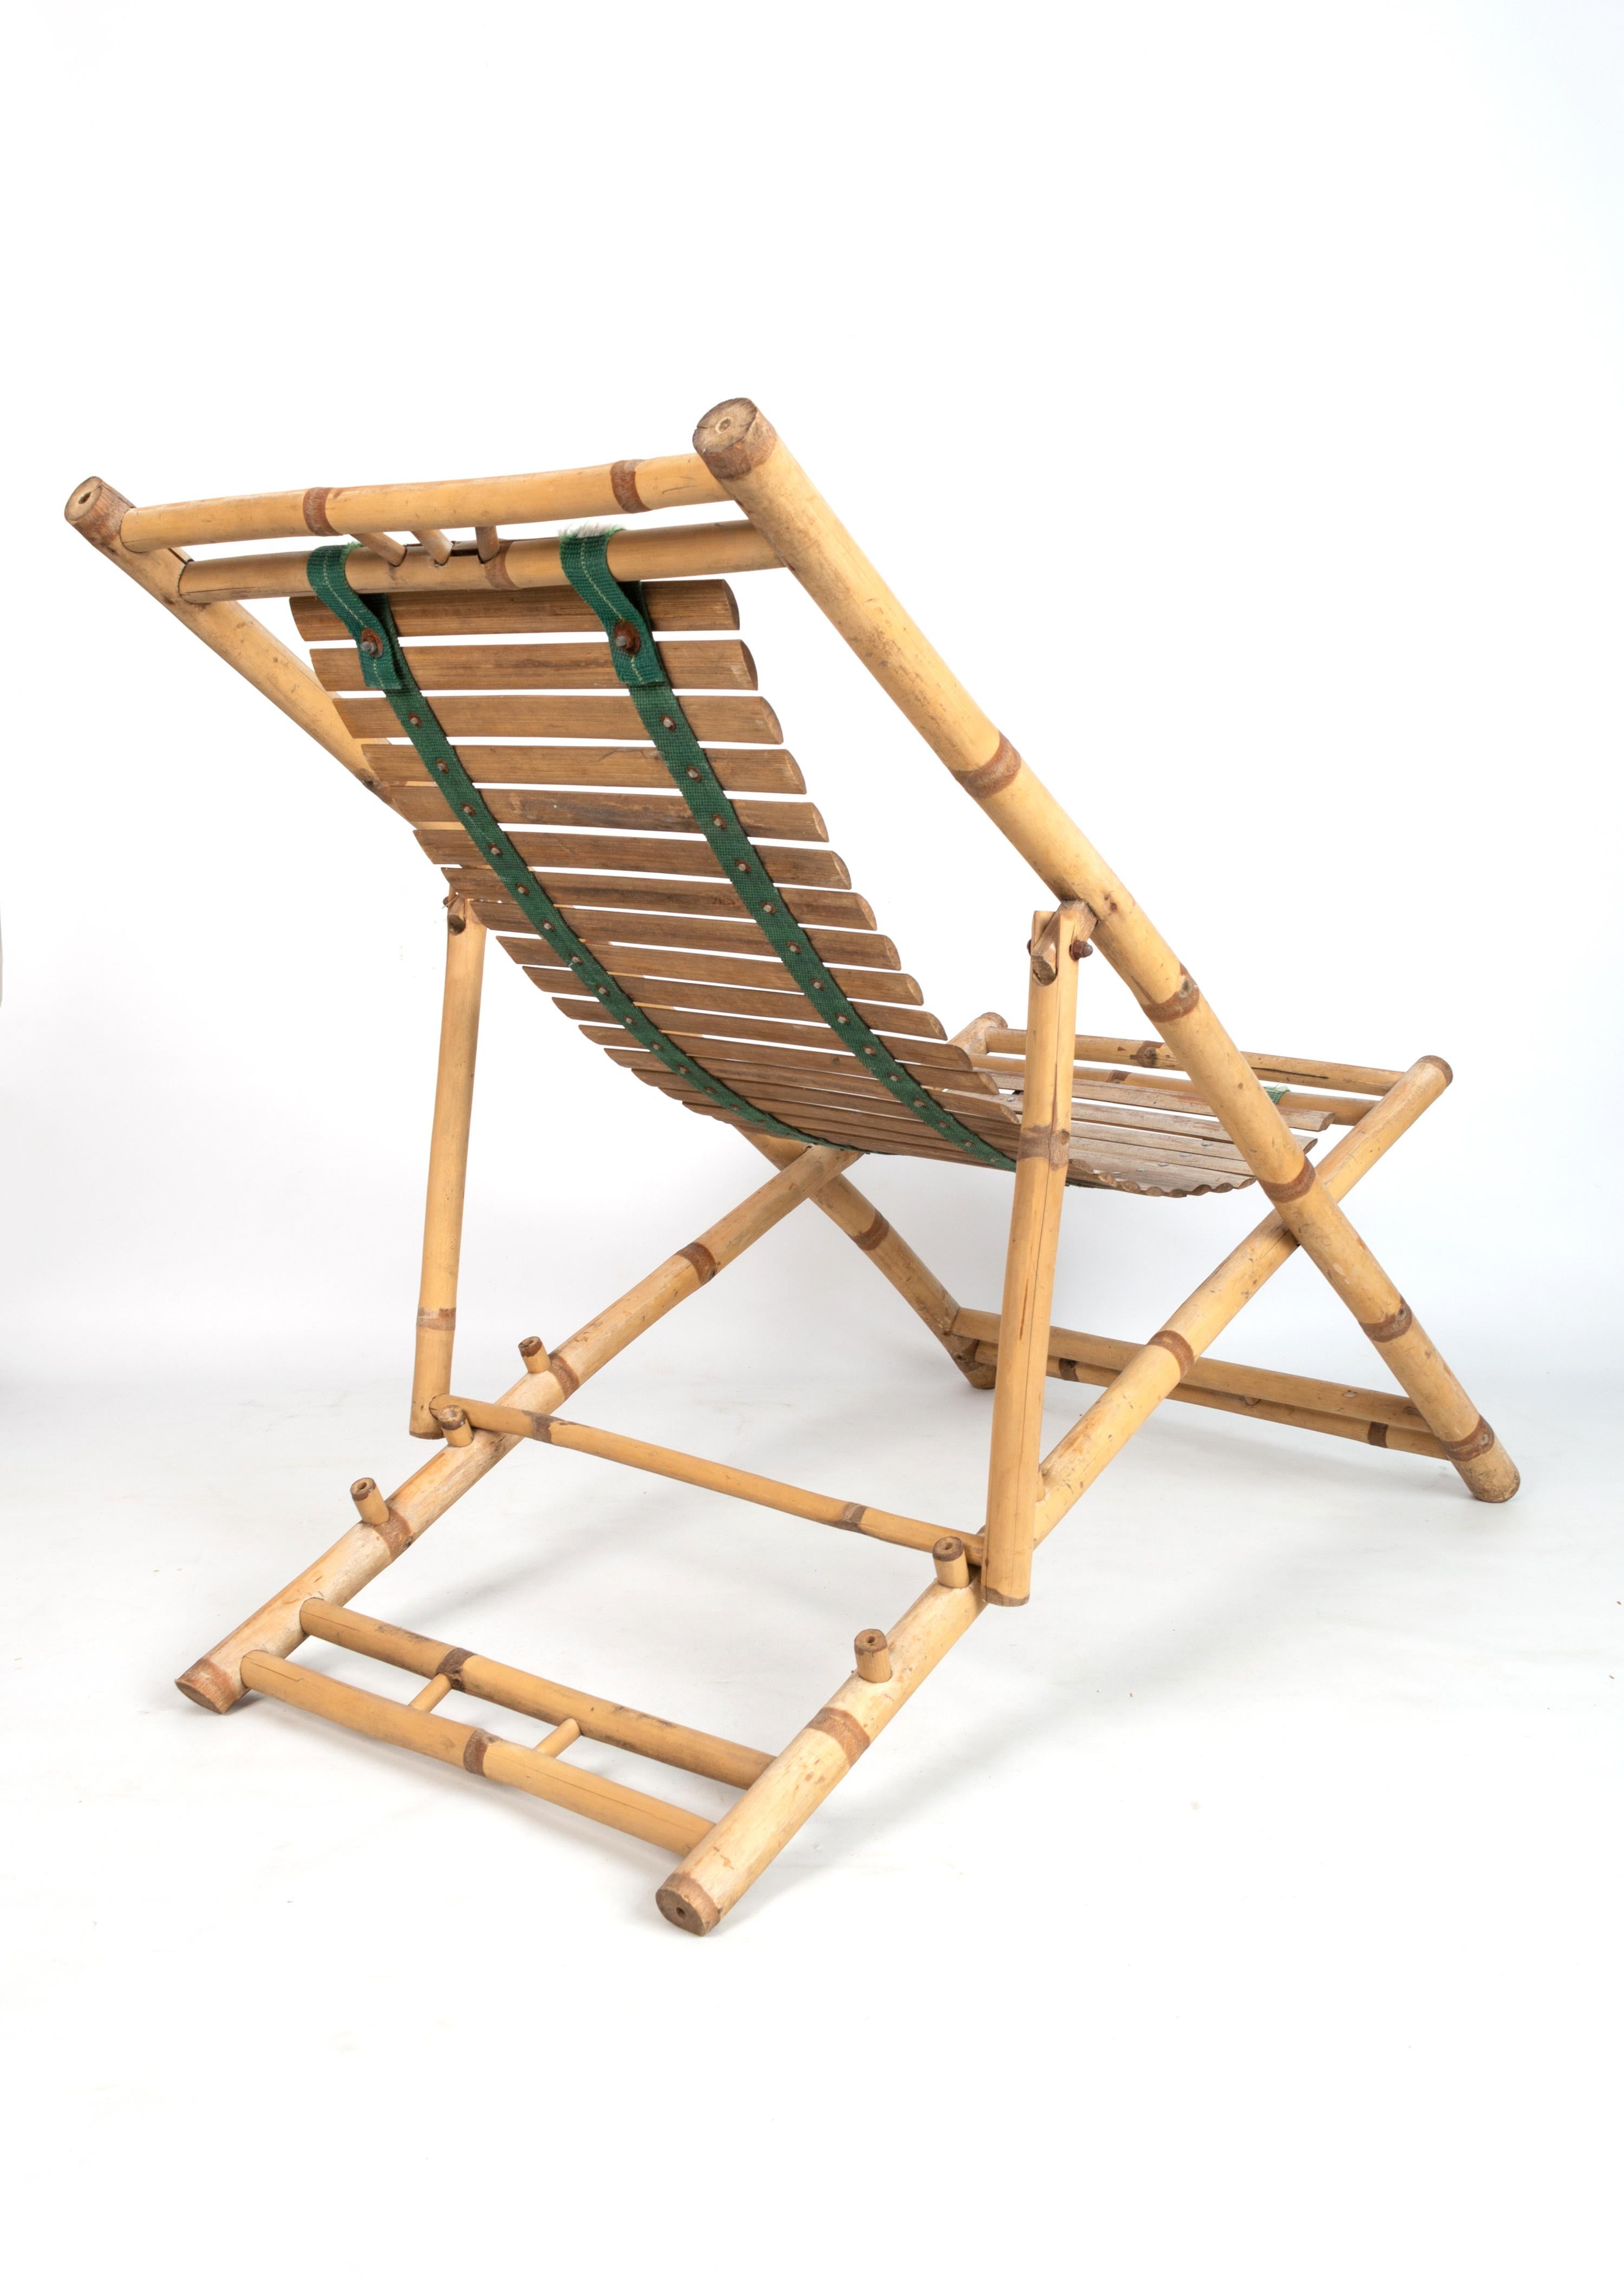 Pair of Bamboo Deck Chairs Sun Loungers C.1980, Italy For Sale 3